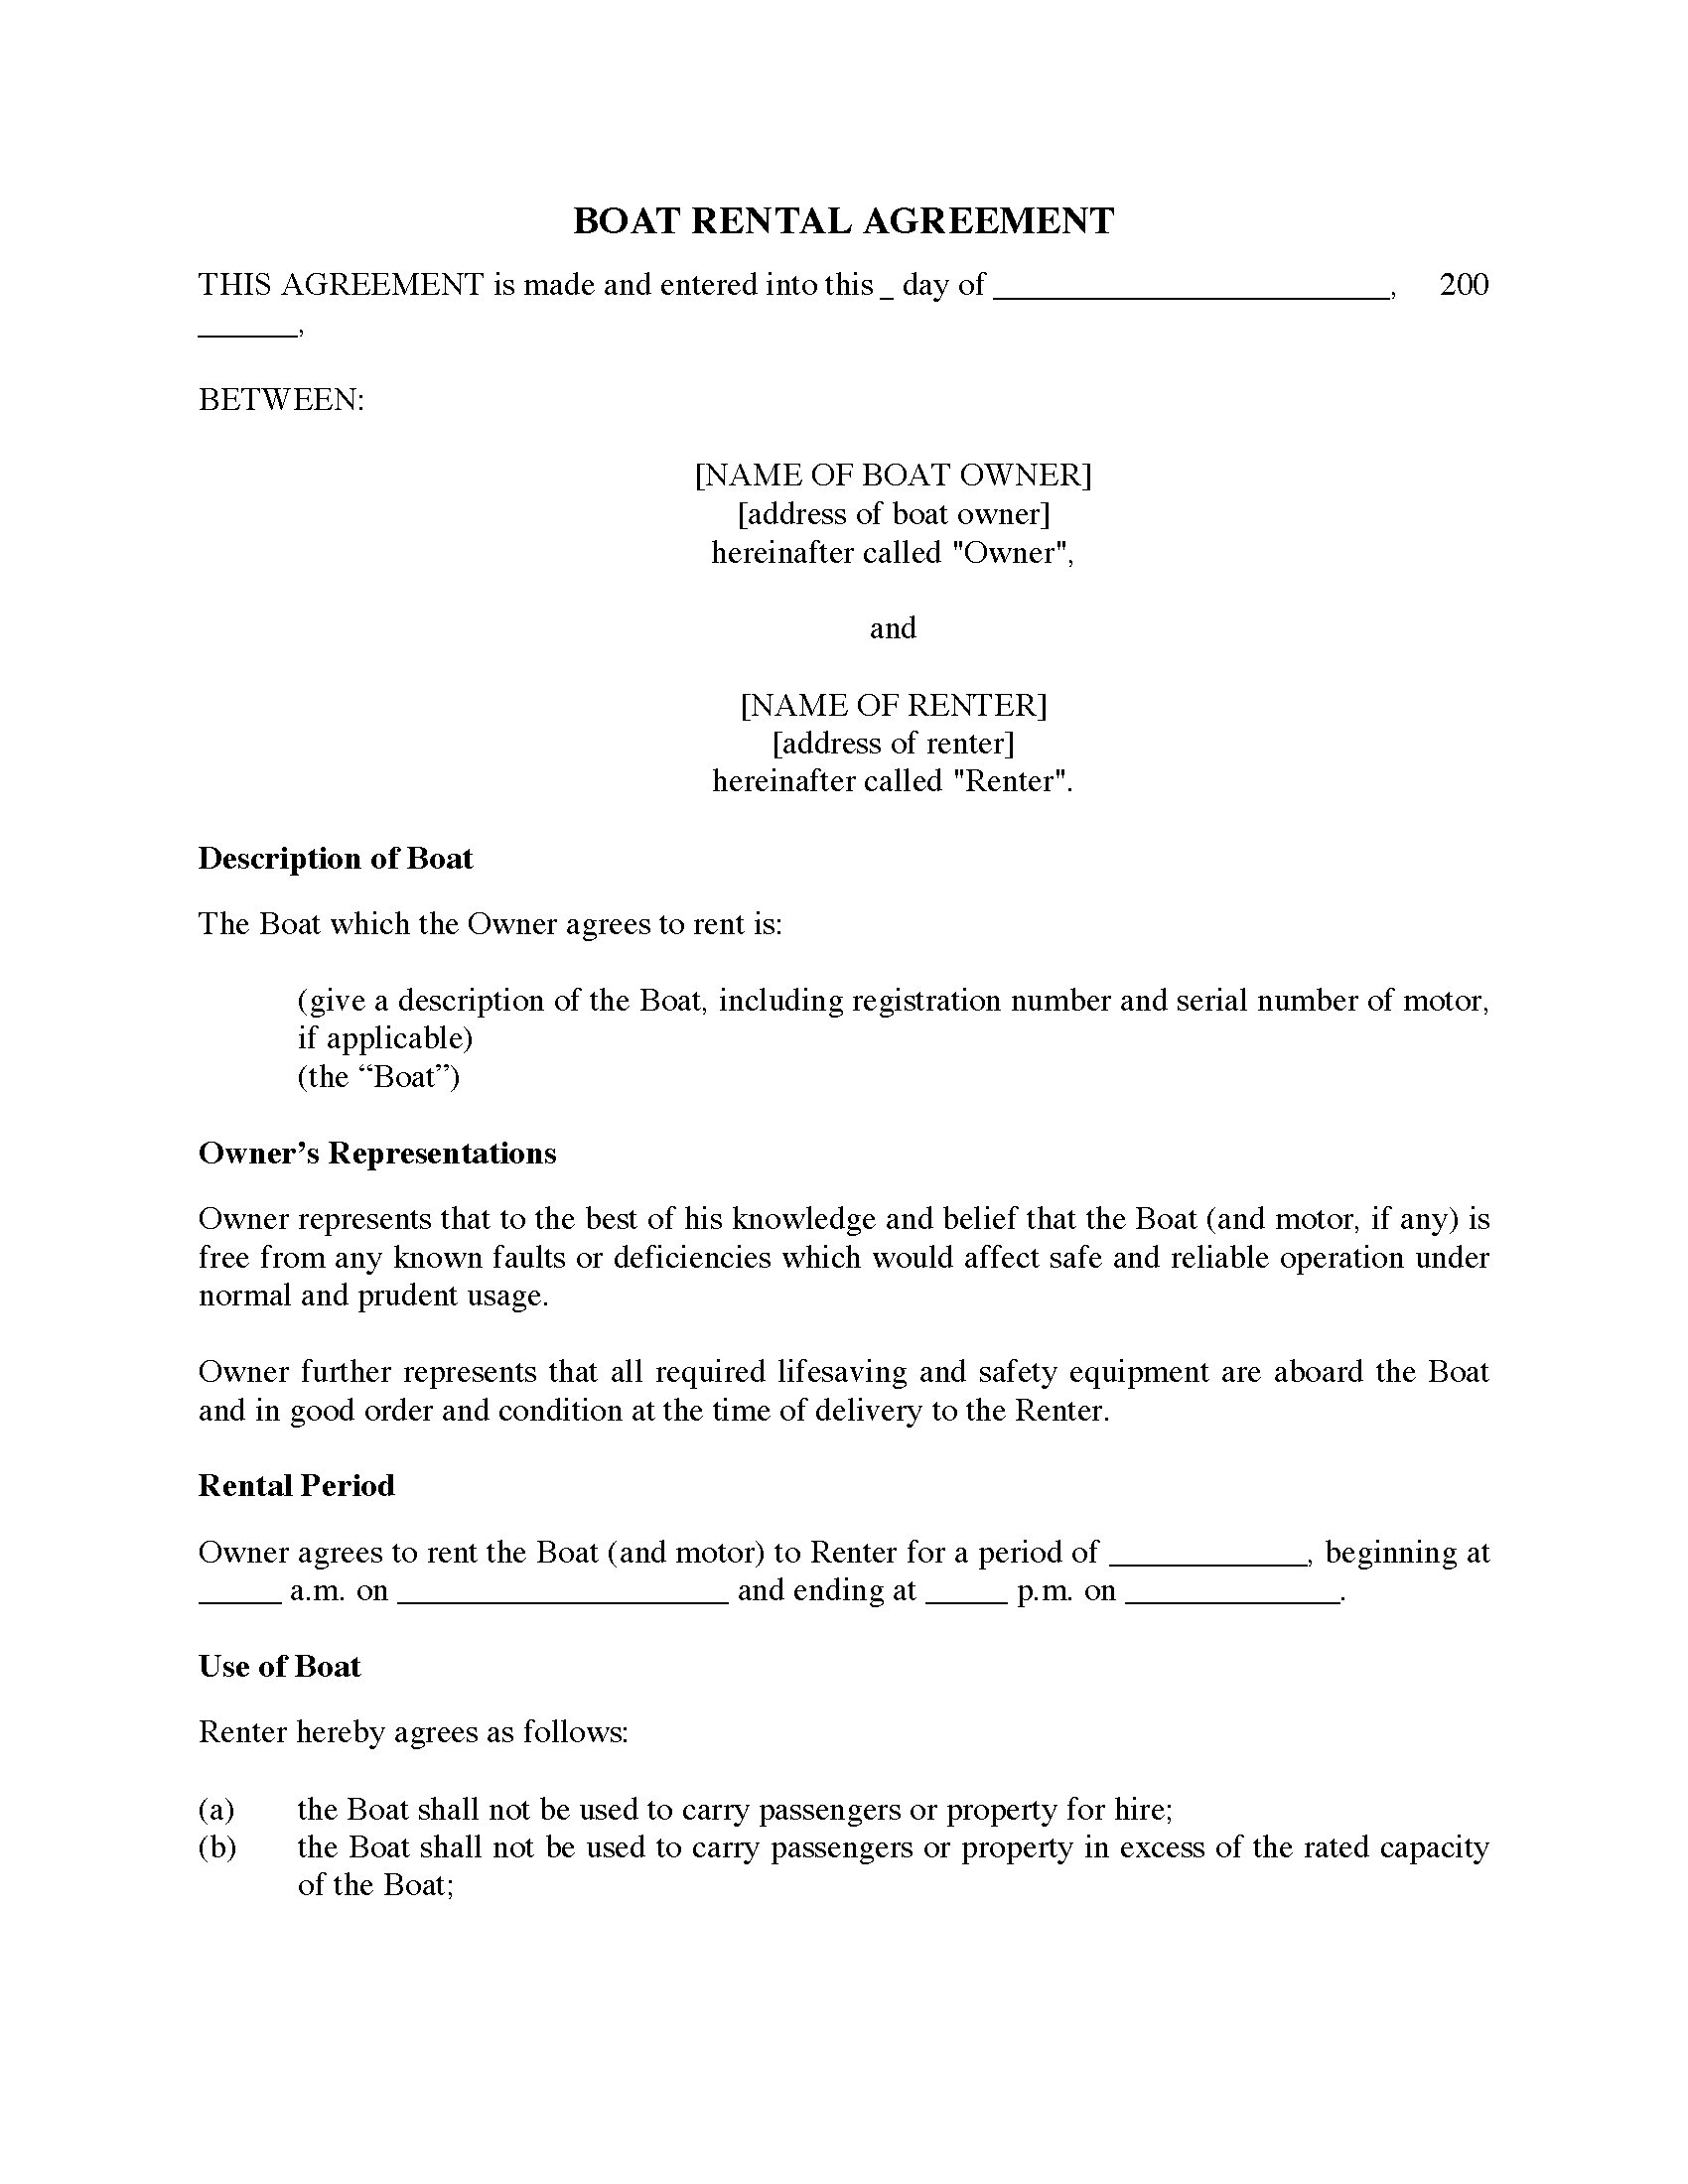 Canada Boat Rental Agreement Legal Forms and Business Templates